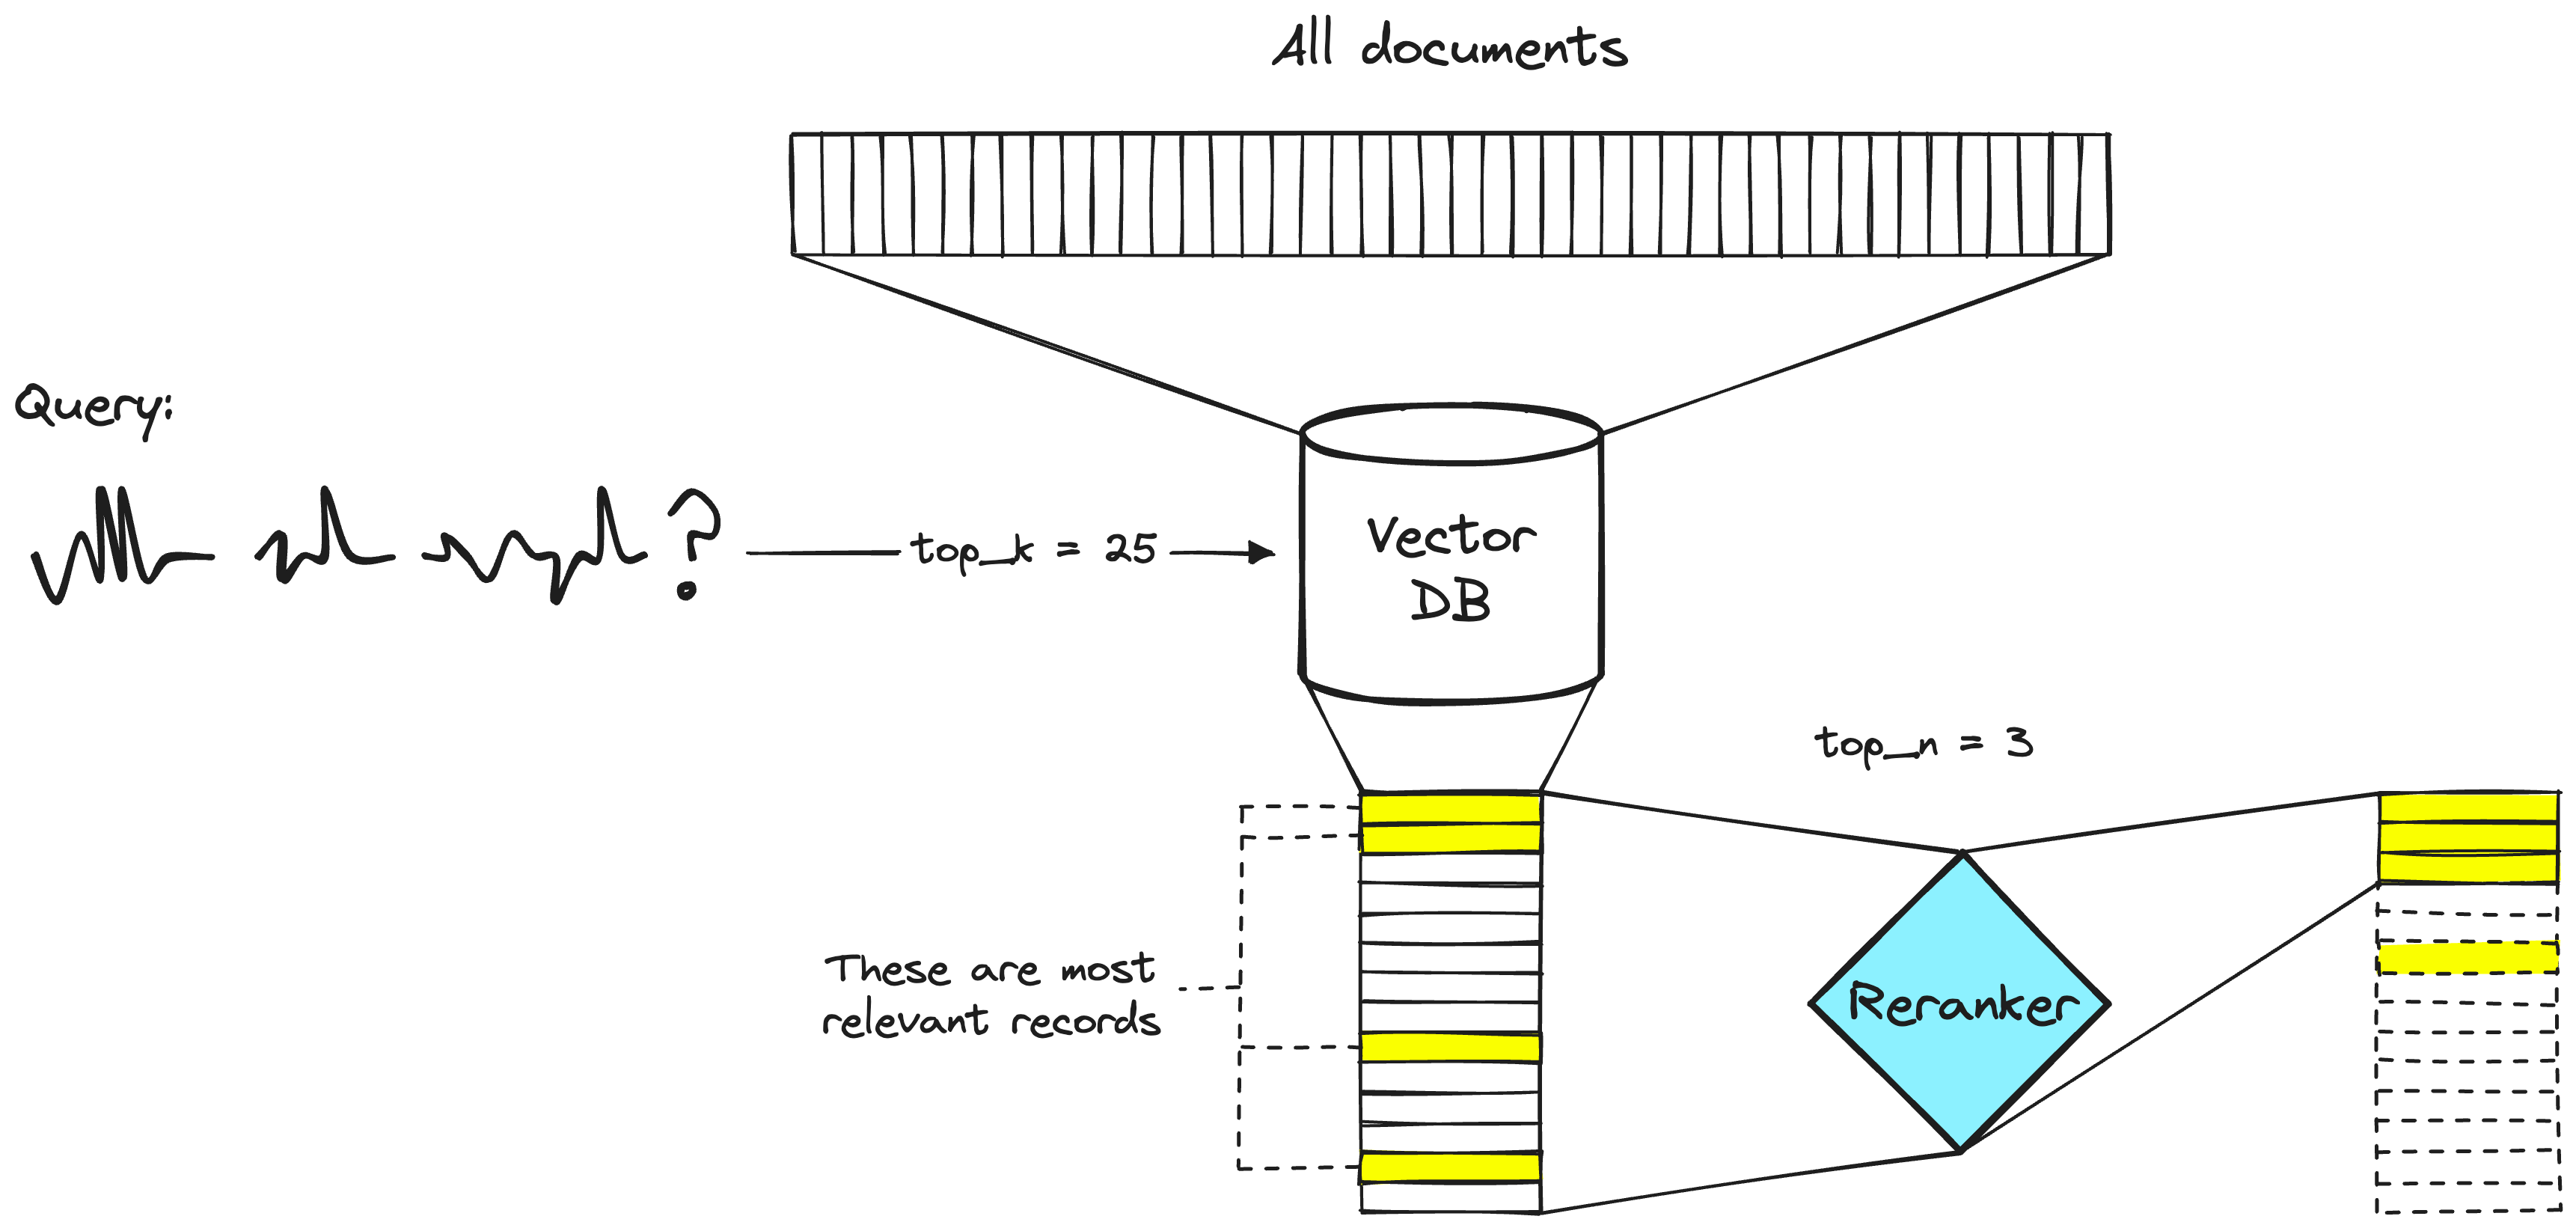 A two-stage retrieval system. The vector DB step will typically include a bi-encoder or sparse embedding model.